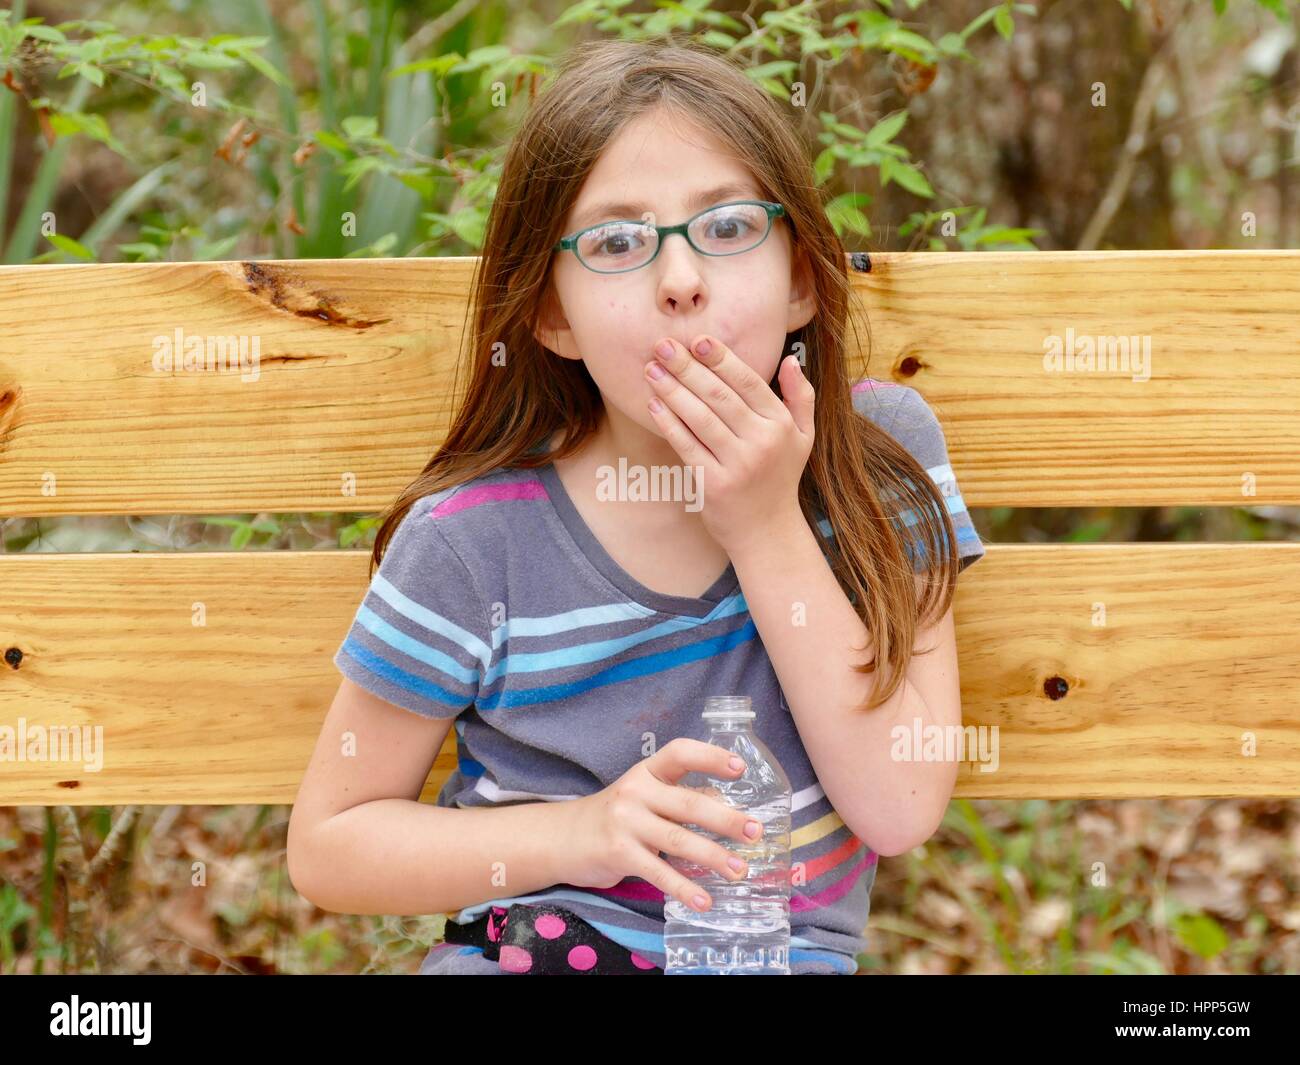 Young girl on wooden bench with hand to mouth, holding a clear water bottle.  Gainesville, Florida, USA. Stock Photo